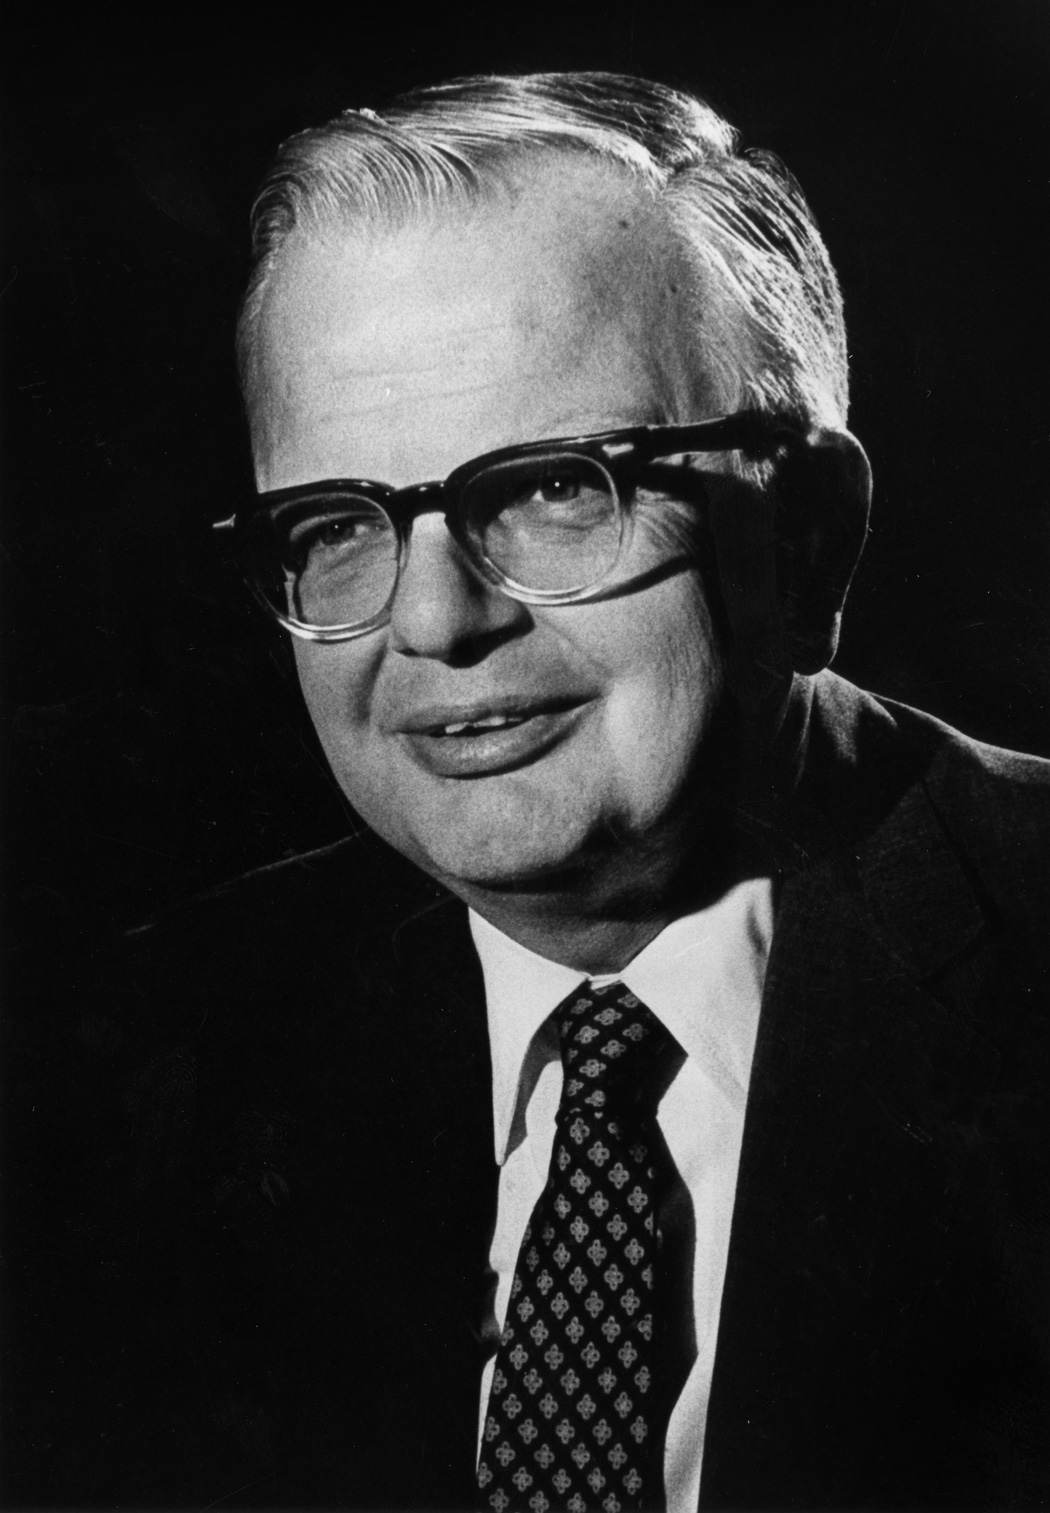 Donald R. Gerth became president in 1976 and served until 1984. Serving in teaching and administrative rolesin the CSU for over 50 years, Gerth also was president of Sacramento State University for 20 years. During his tenure, Gerth guided the college toward university status, instituted new management policies to help the campus become a full-fledged urban university, and brought the 1984 Olympics to campus